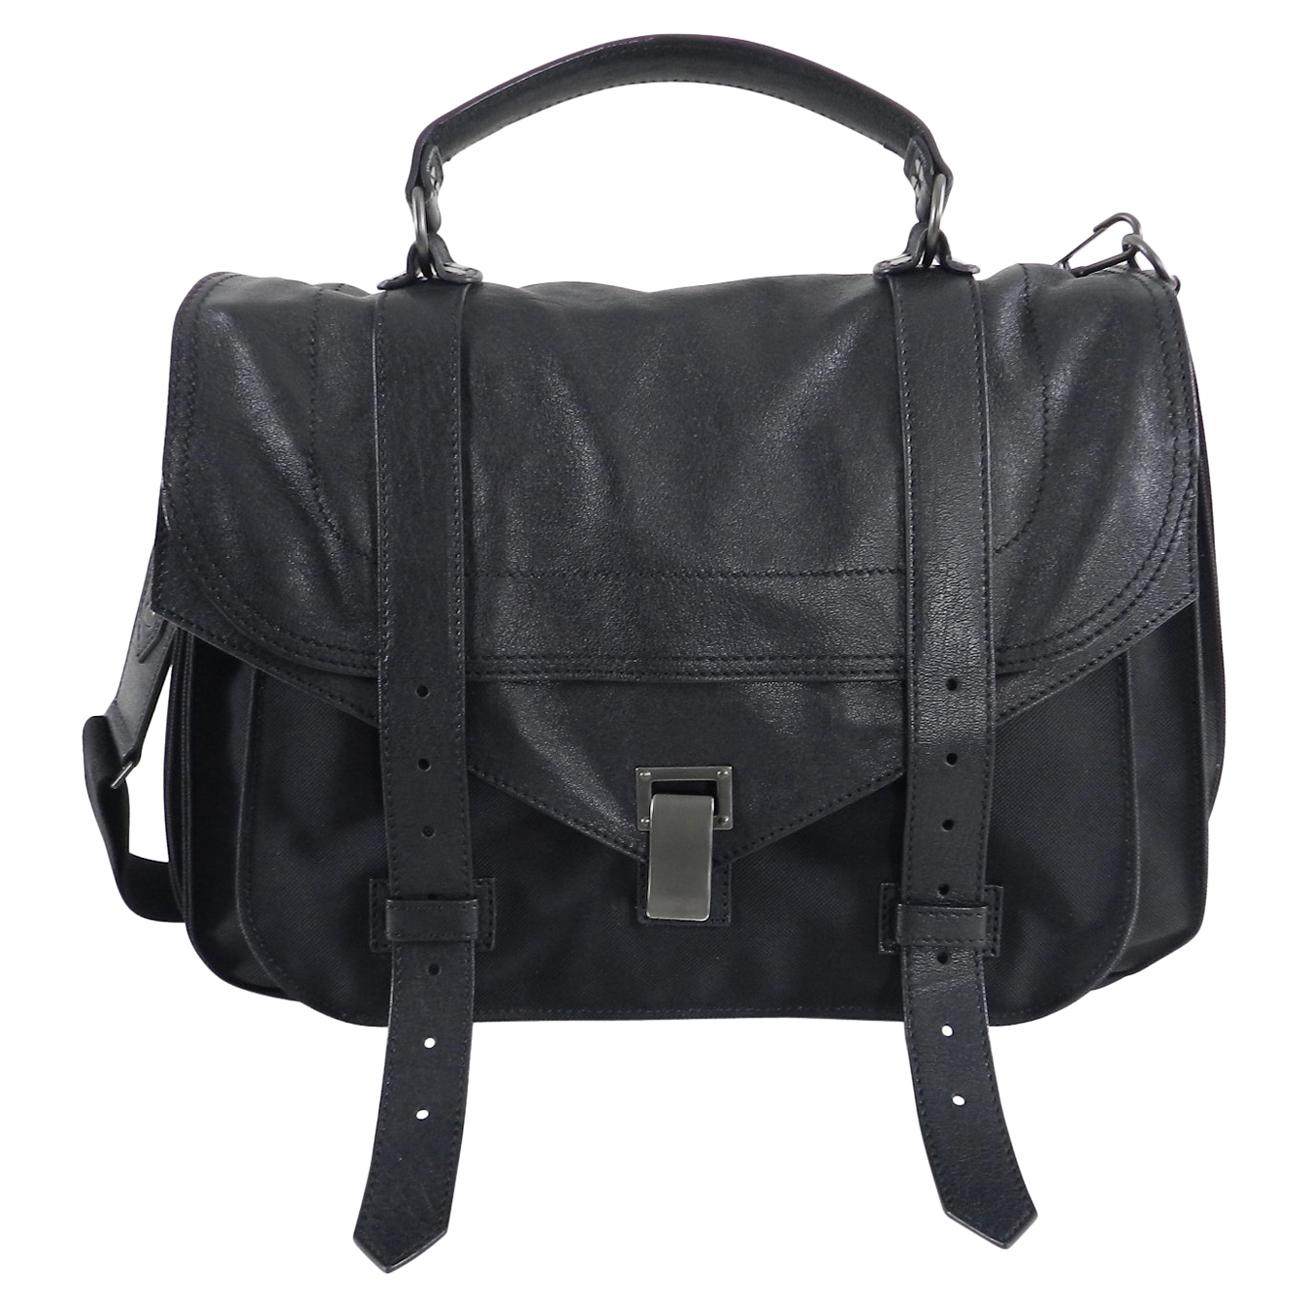 Proenza Schouler PS1 Extra Large Black Leather and Nylon Bag